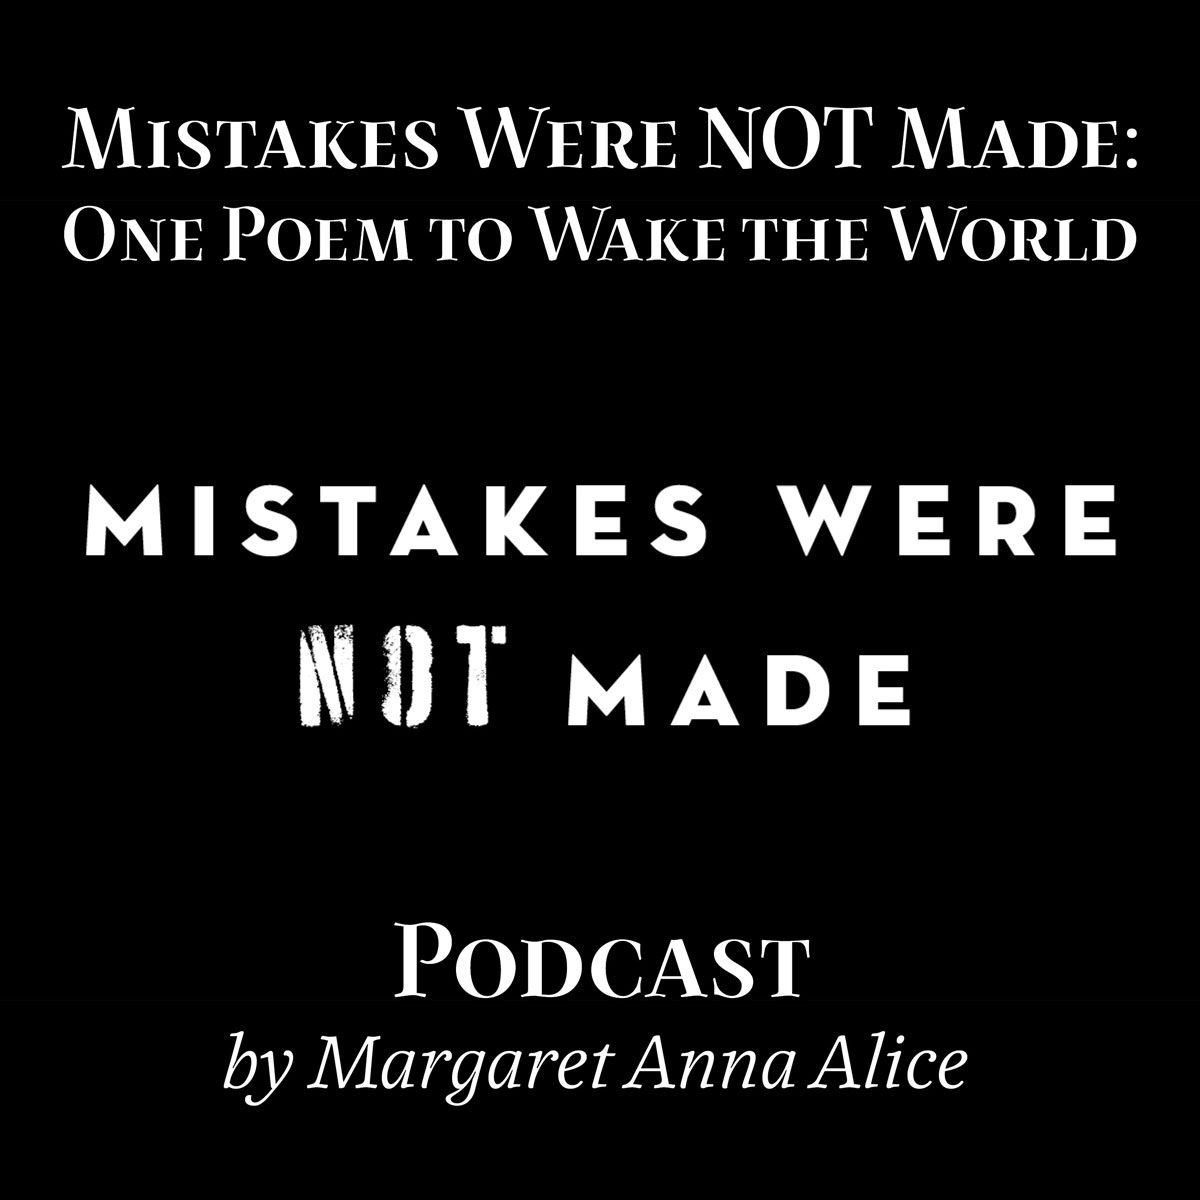 Mistakes Were NOT Made: One Poem to Wake the World (Podcast Artwork)